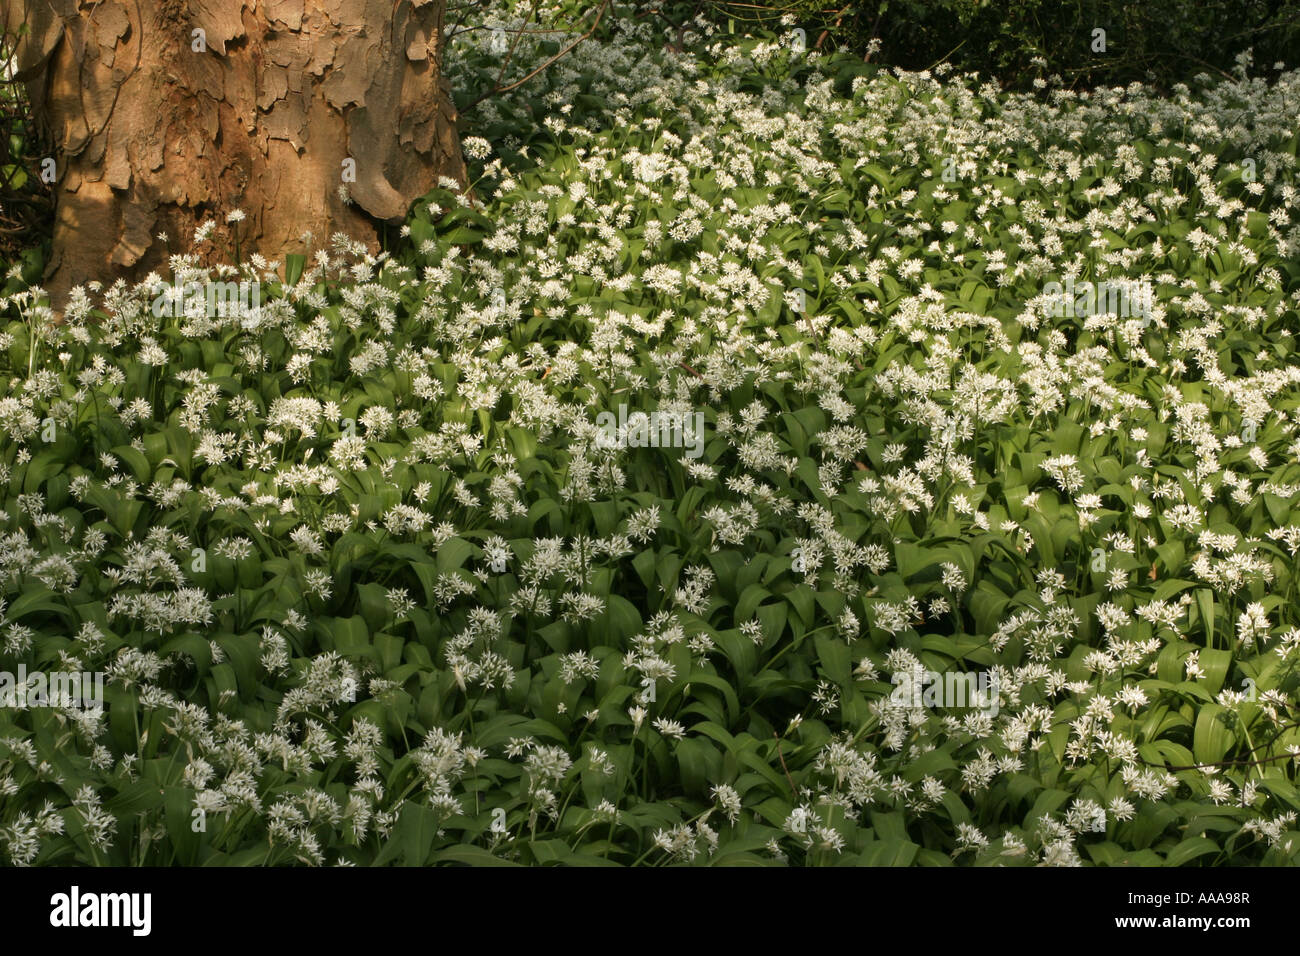 Wild Garlic growing in a wood around a tree trunk Stock Photo